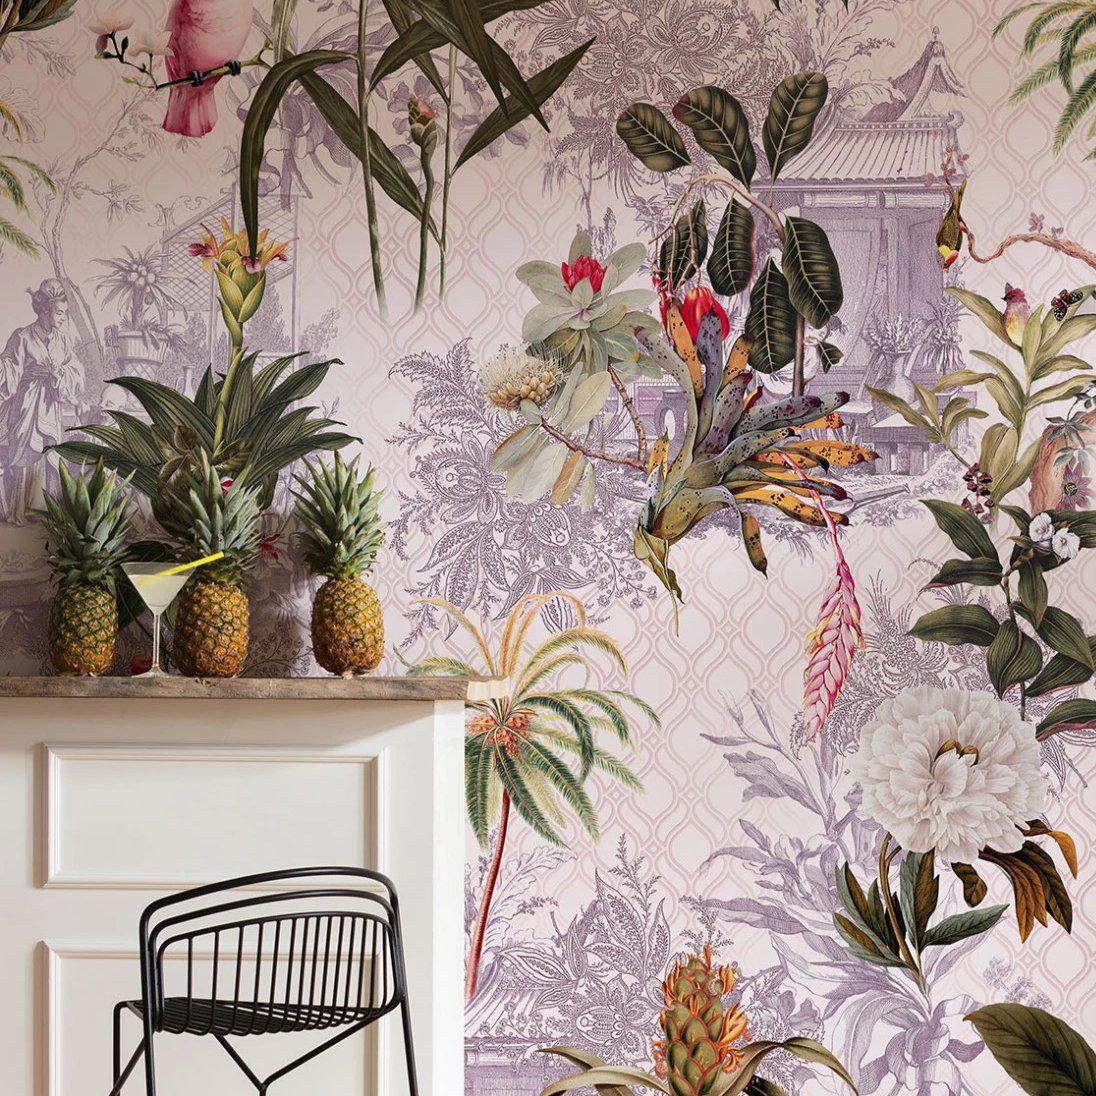 Eda Tropical Mural Wallpaper-Wall Decor-ECO MURALS, MURALS, MURALS / WALLPAPERS, NON-WOVEN WALLPAPER, PALM WALLPAPER, TROPICAL MURAL, TROPICAL WALLPAPERS-Forest Homes-Nature inspired decor-Nature decor